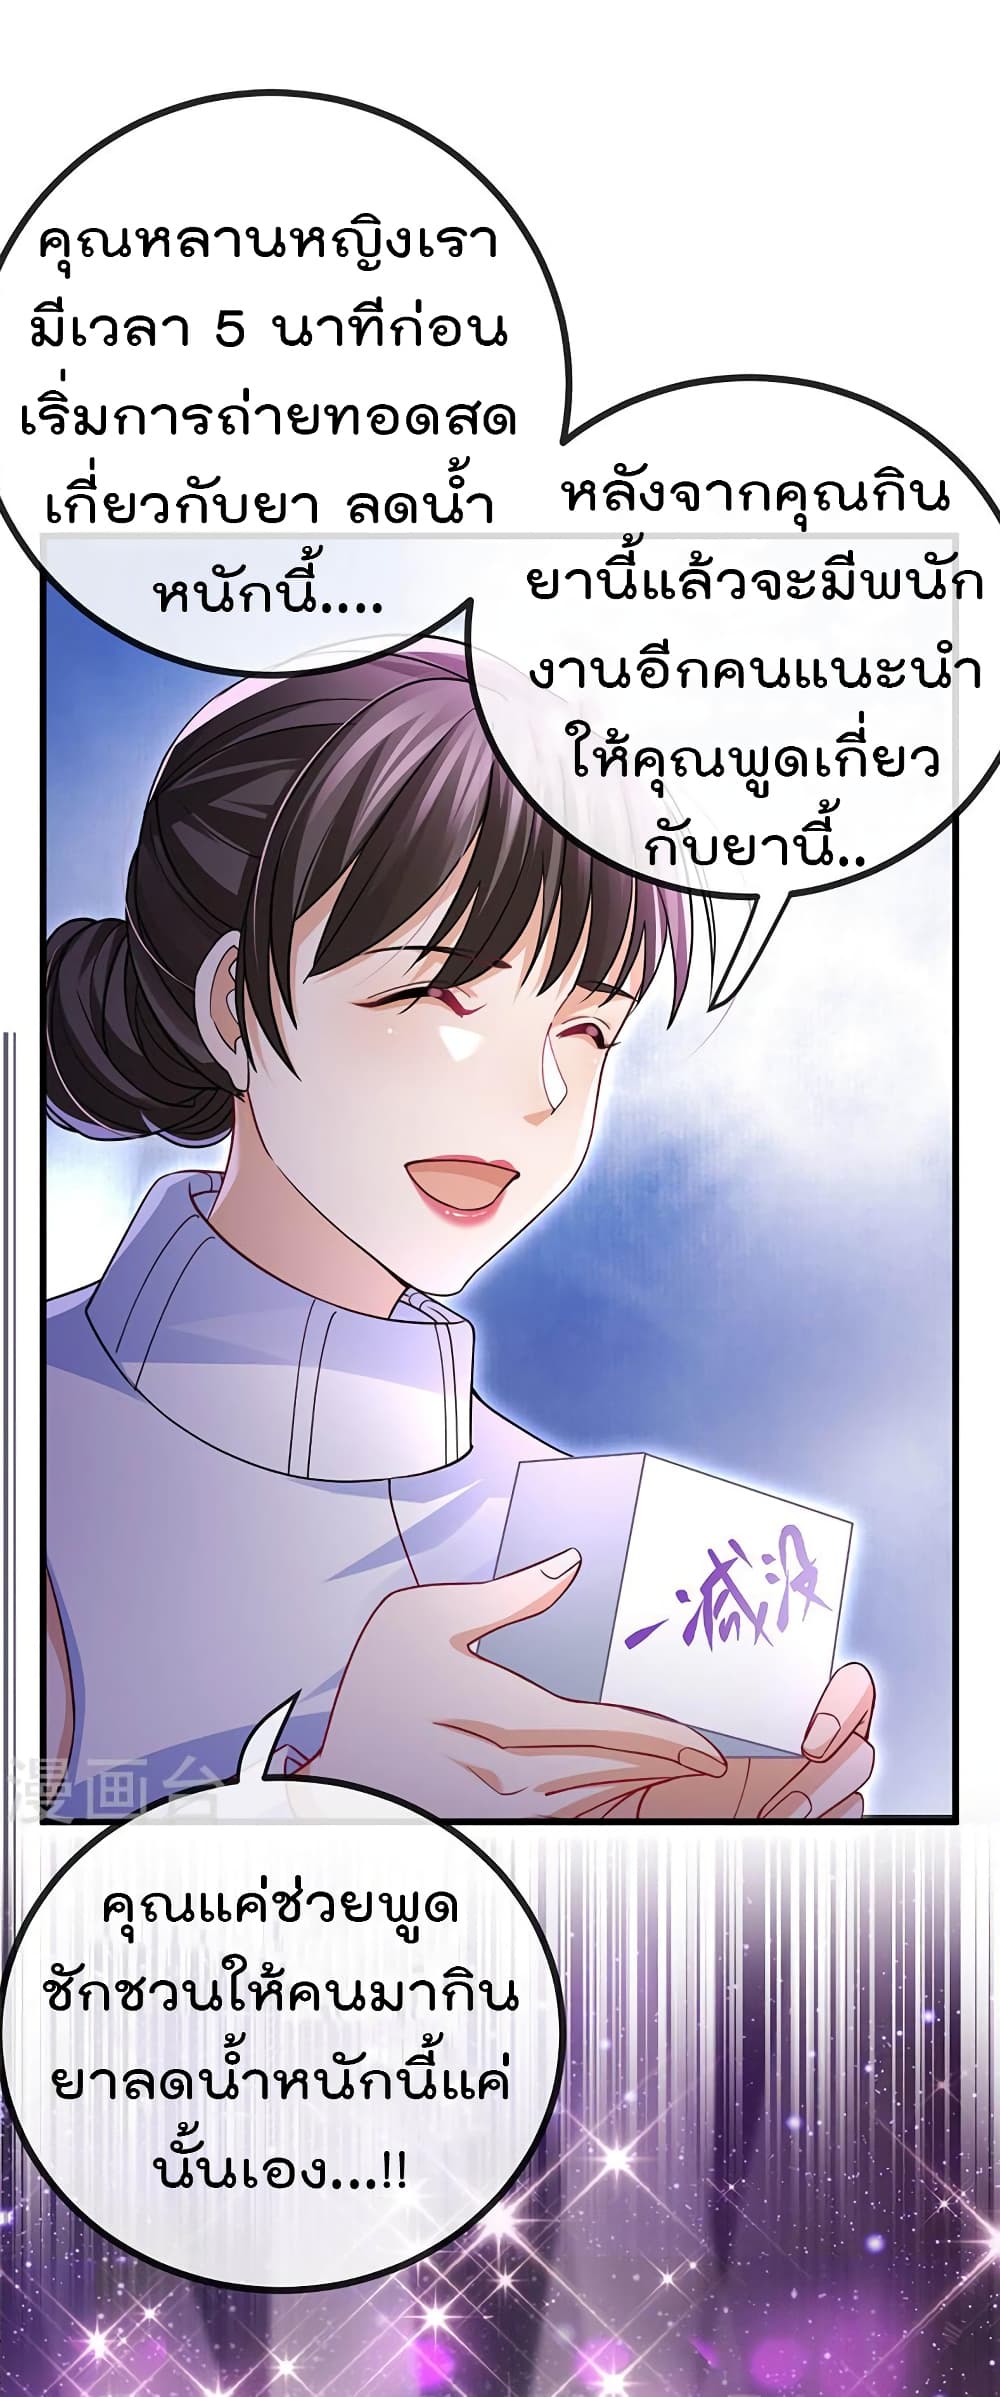 One Hundred Ways to Abuse Scum ตอนที่ 79 (10)